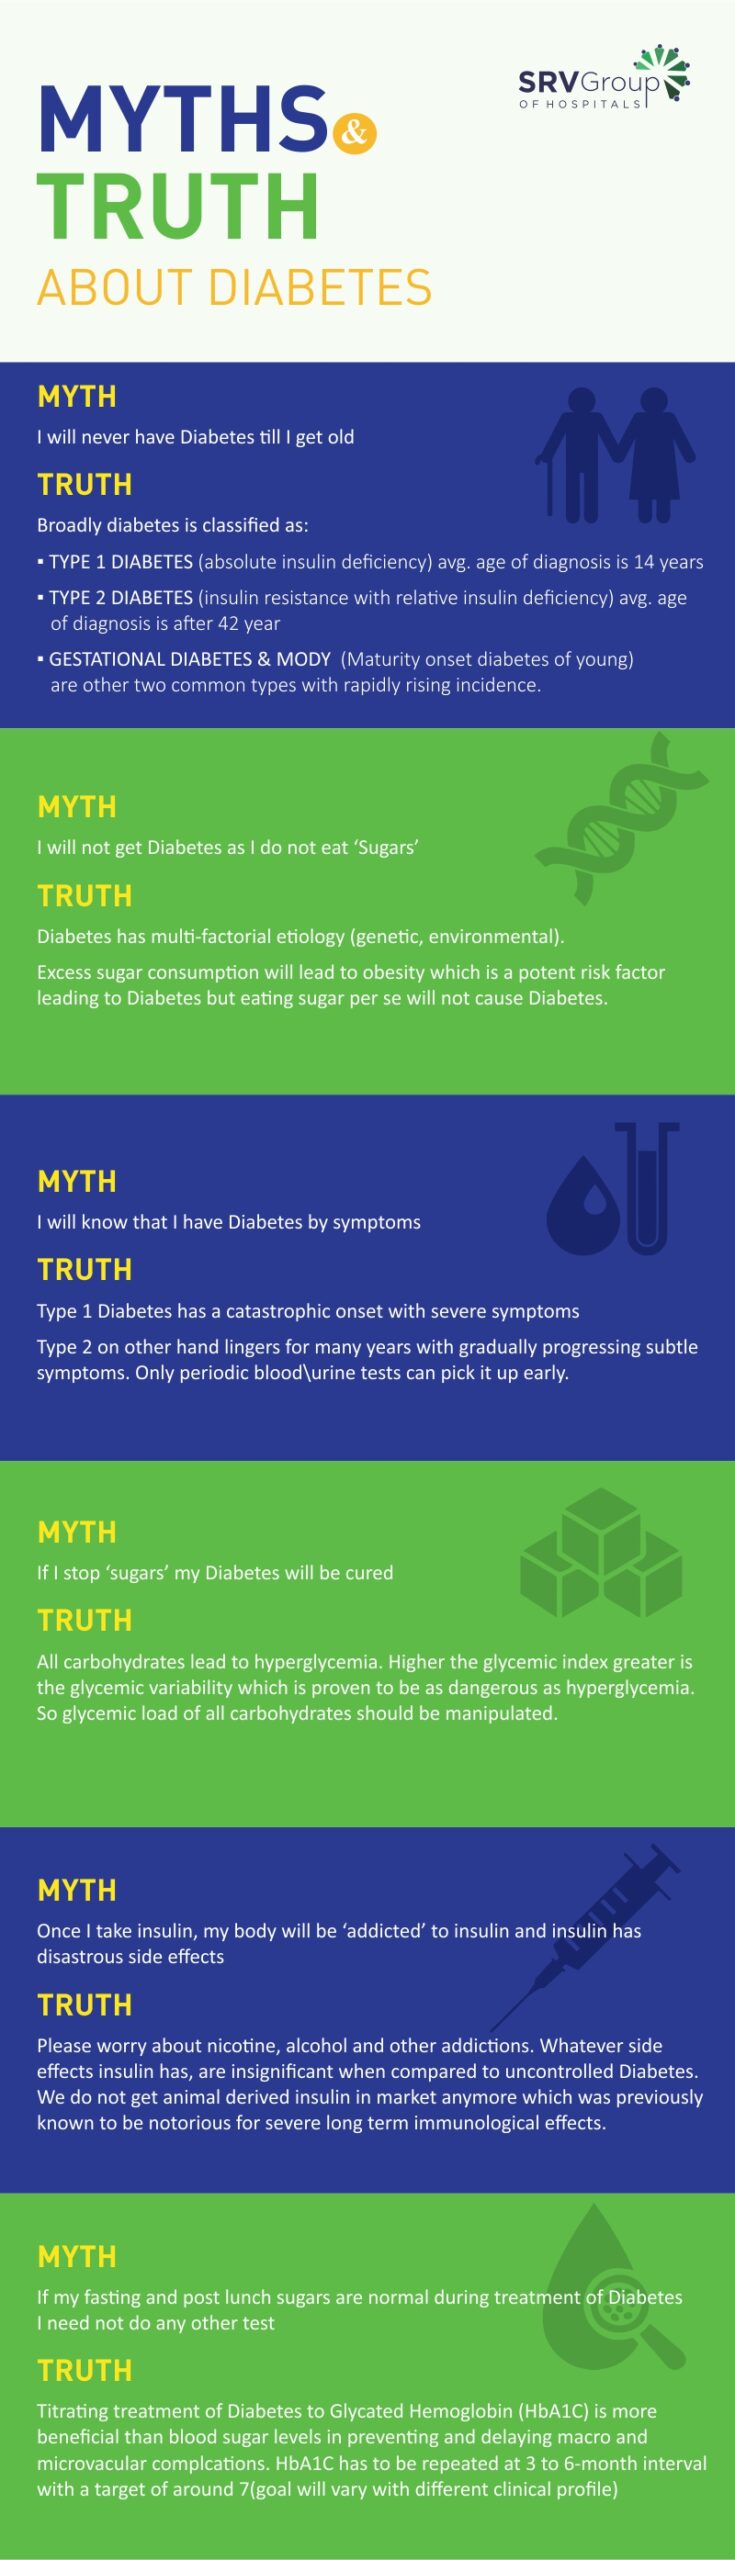 Busting Myths about Diabetes